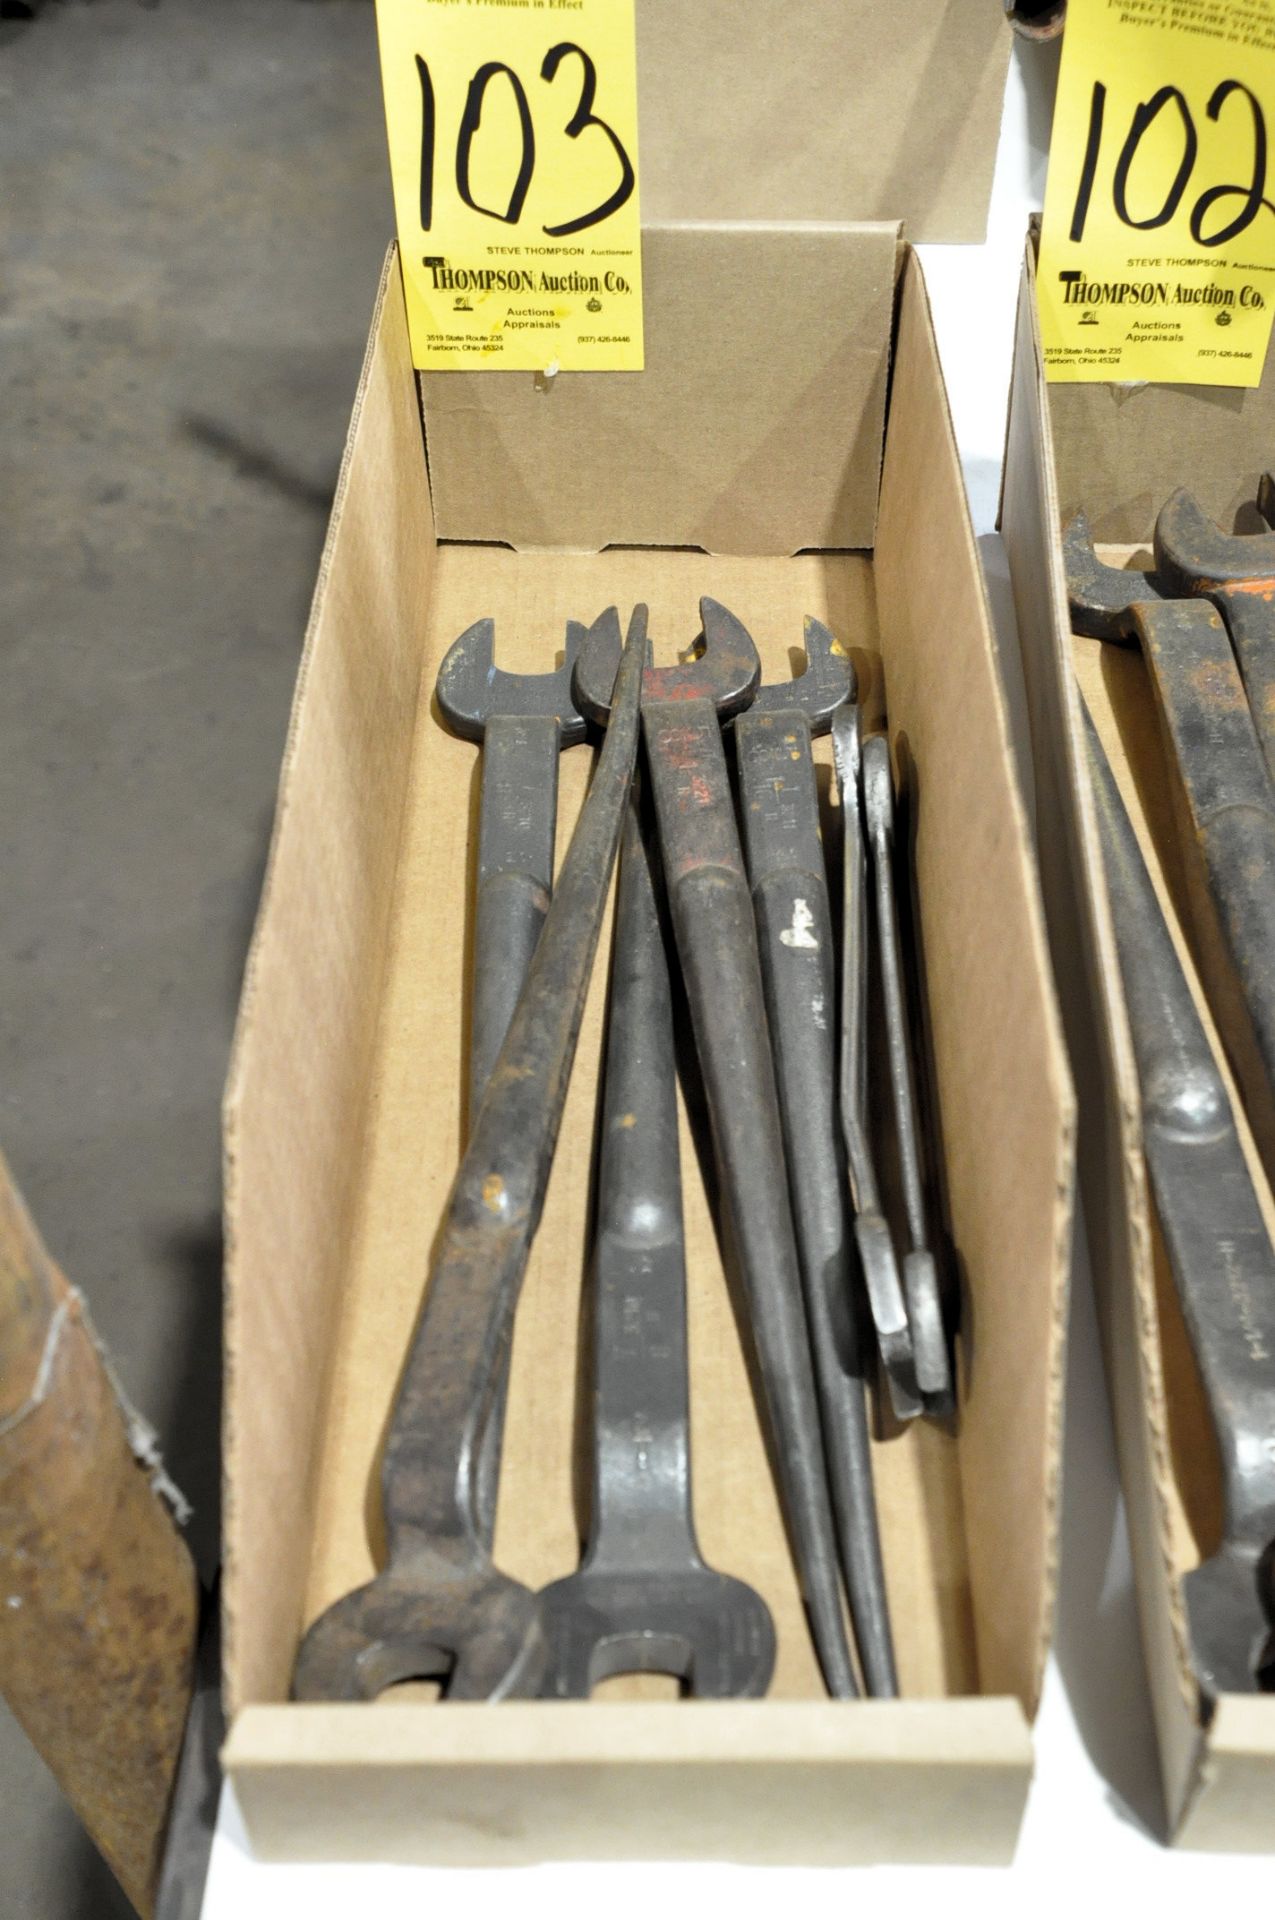 Lot-Iron Worker Spud Wrenches in (1) Box